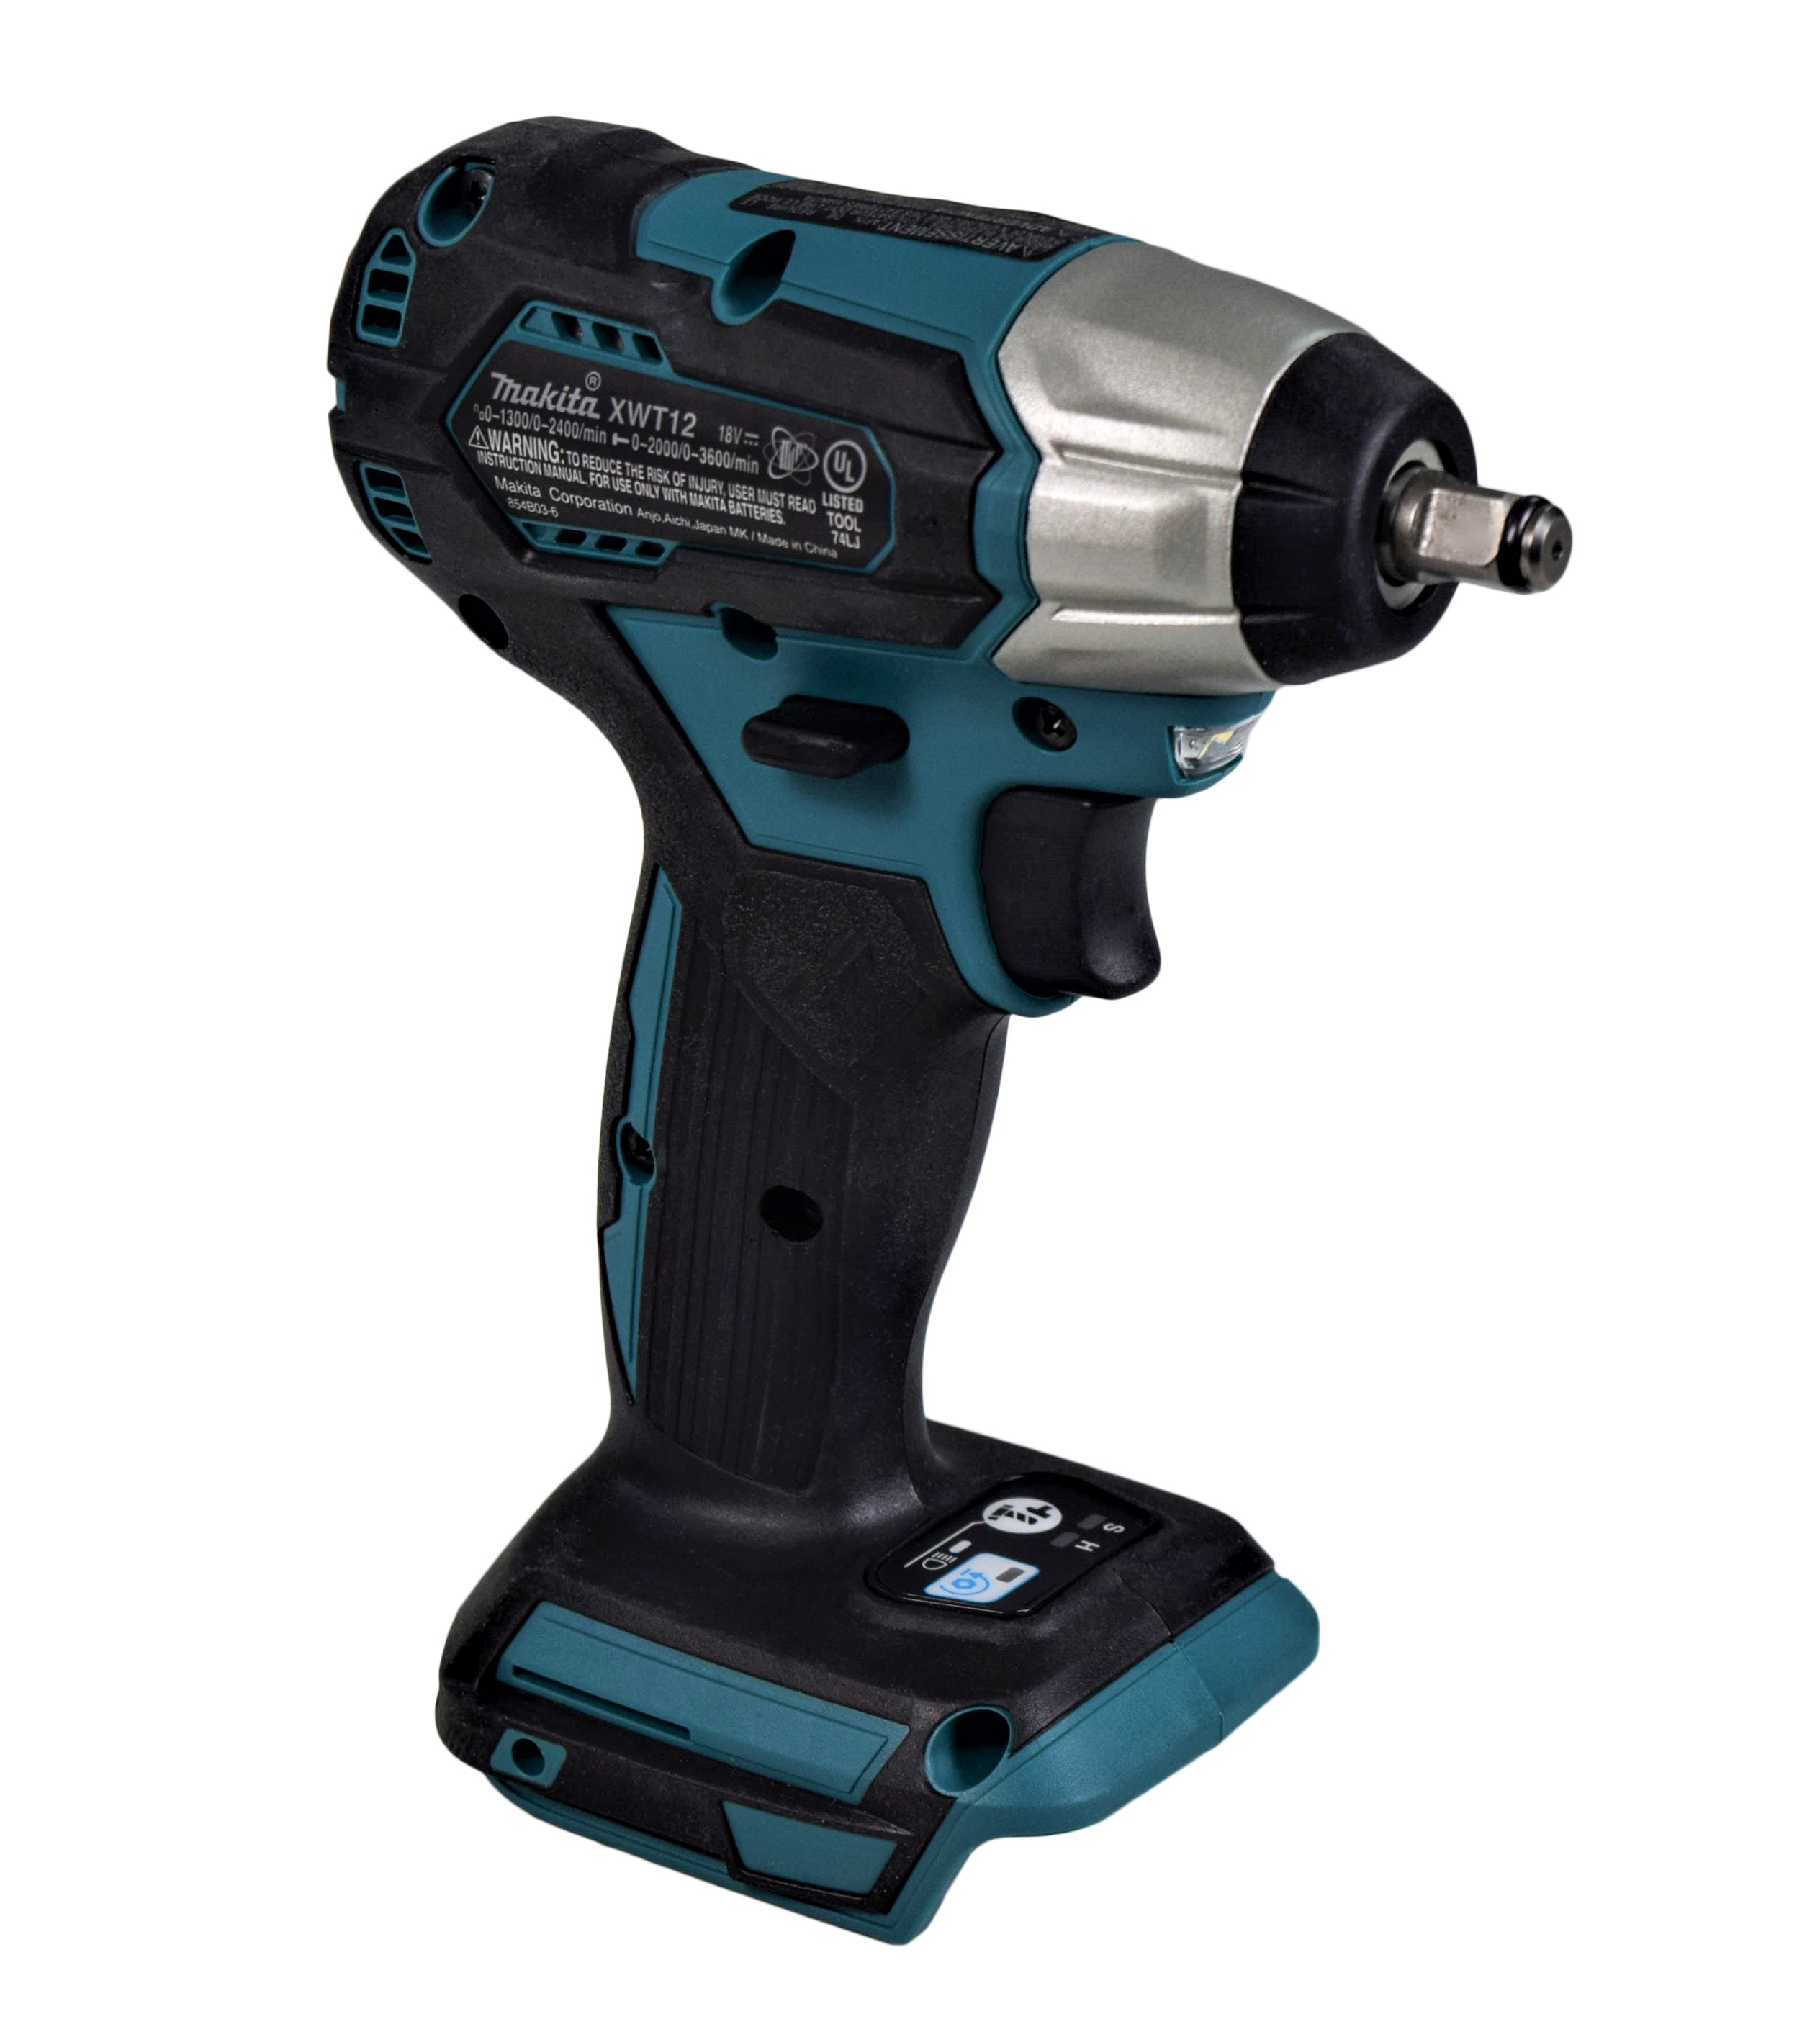 Makita XWT12Z 18V LXT Lithium-Ion Sub-Compact Brushless Cordless 3/8-inch Sq. Drive Impact Wrench (Tool Only)